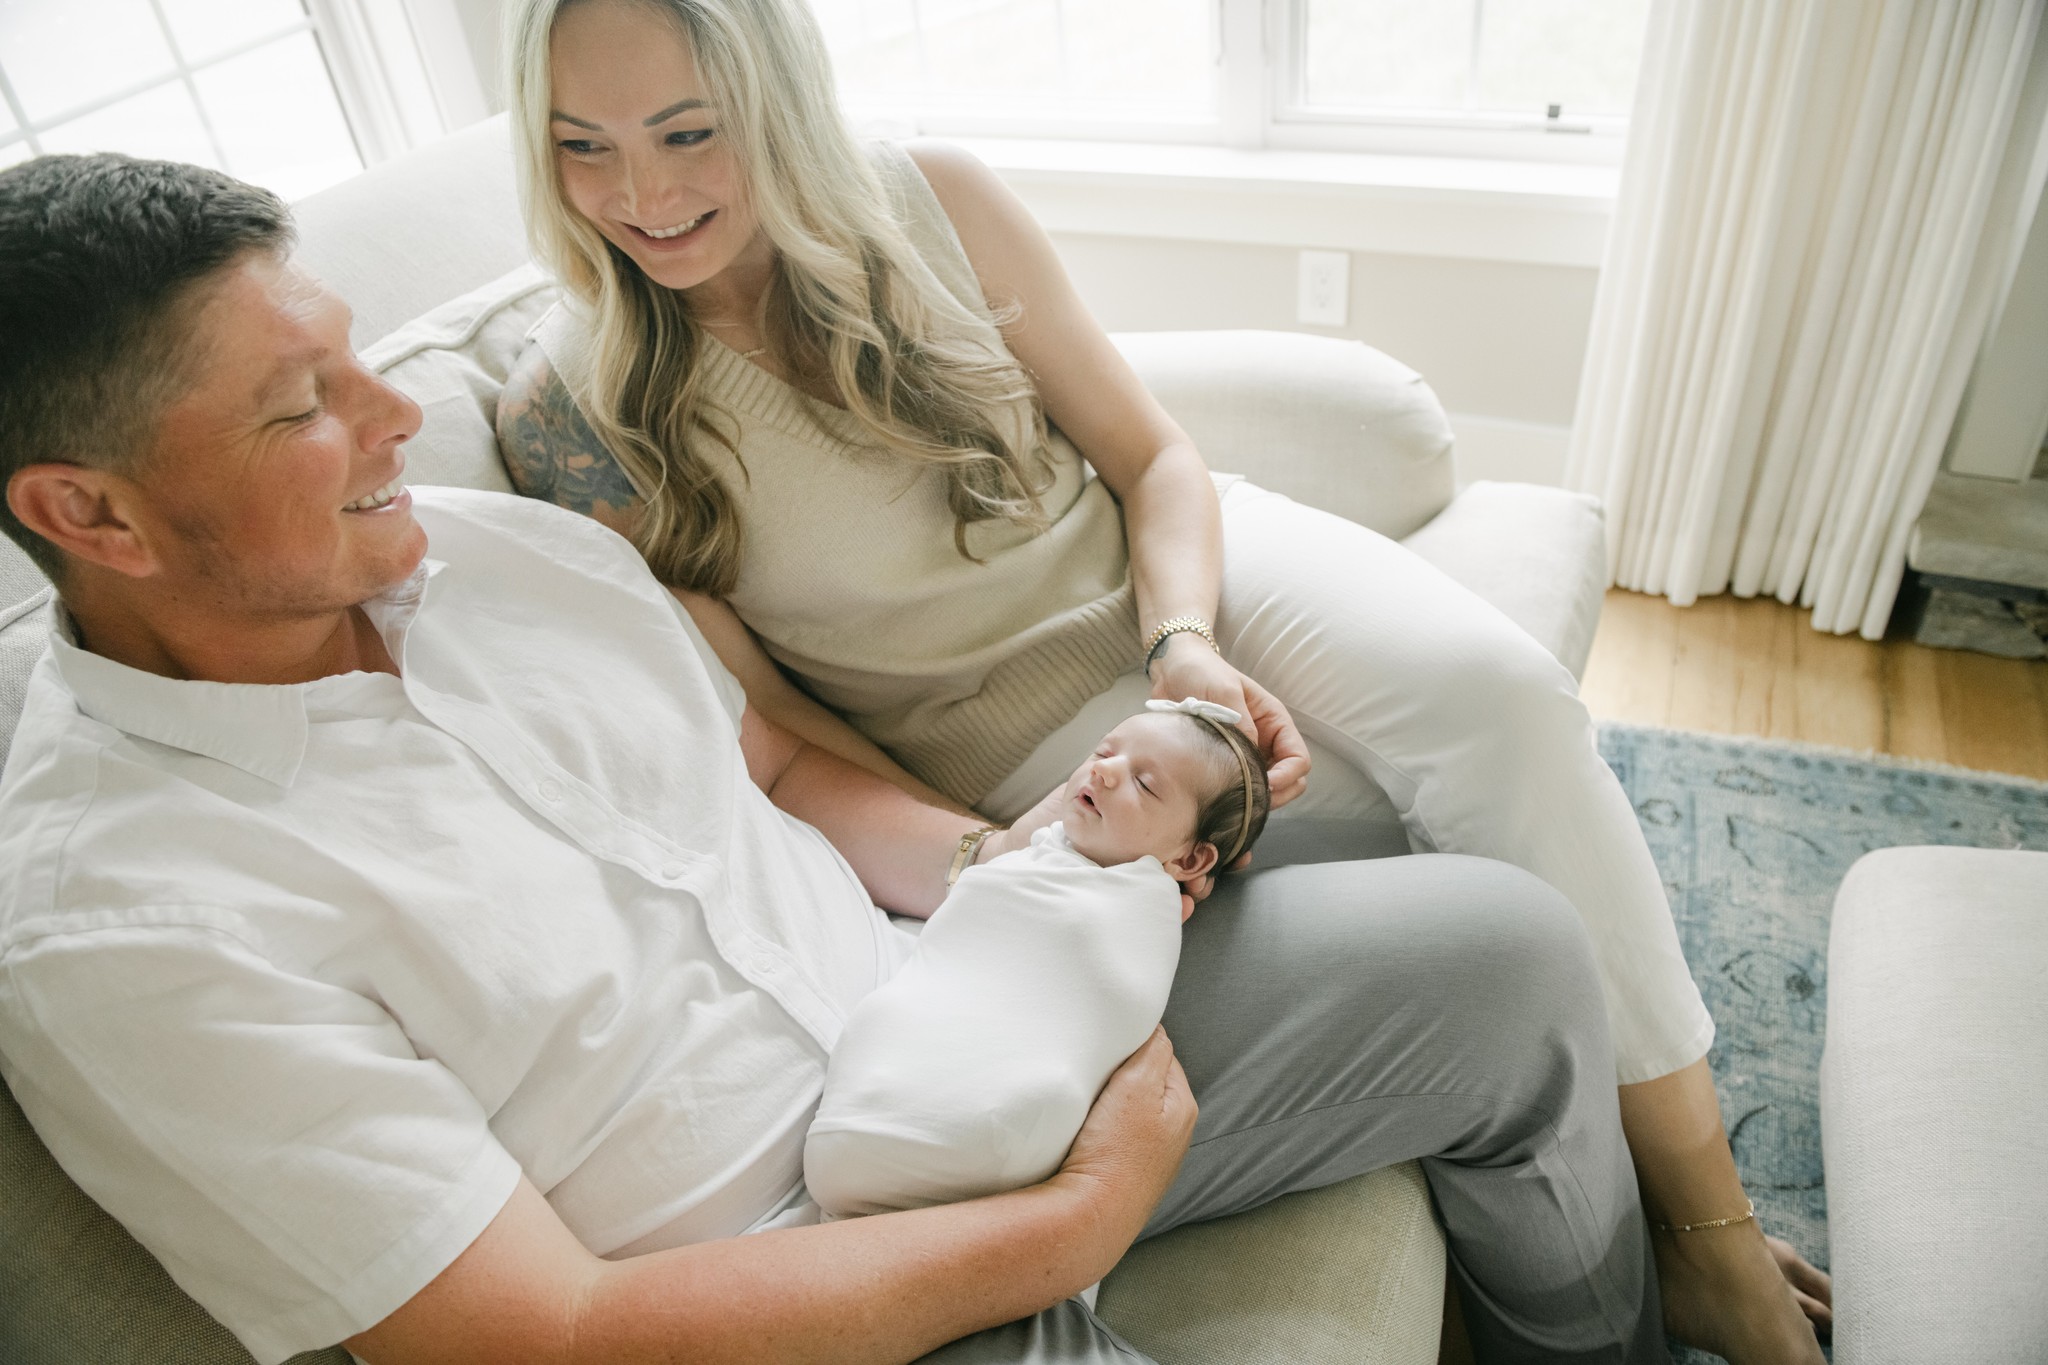 A mom and dad smile down at their sleeping newborn baby in dad's lap as they sit on a couch under a window